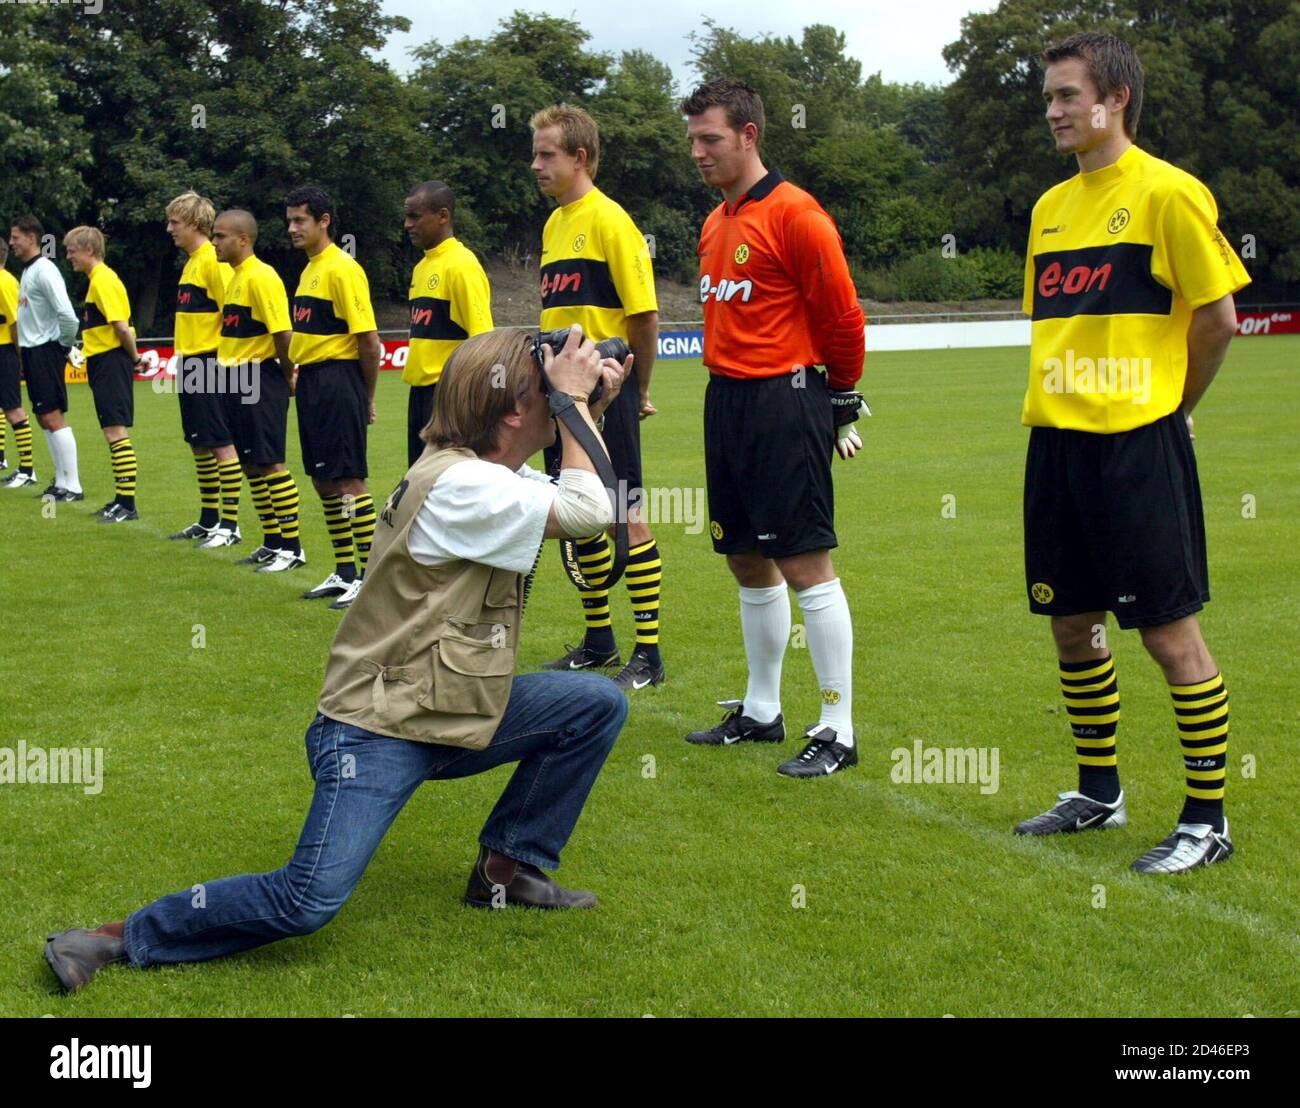 A photographer takes a photo of Borussia Dortmund's Tomas Rosicky (R) from the Czech Republic during the official team presentation in Dortmund July 5, 2002. Borussia Dortmund, which play in the German premier league Bundesliga won the German Championship in May 2002. REUTERS/Ina Fassbender REUTERS  INA/FAB Stock Photo